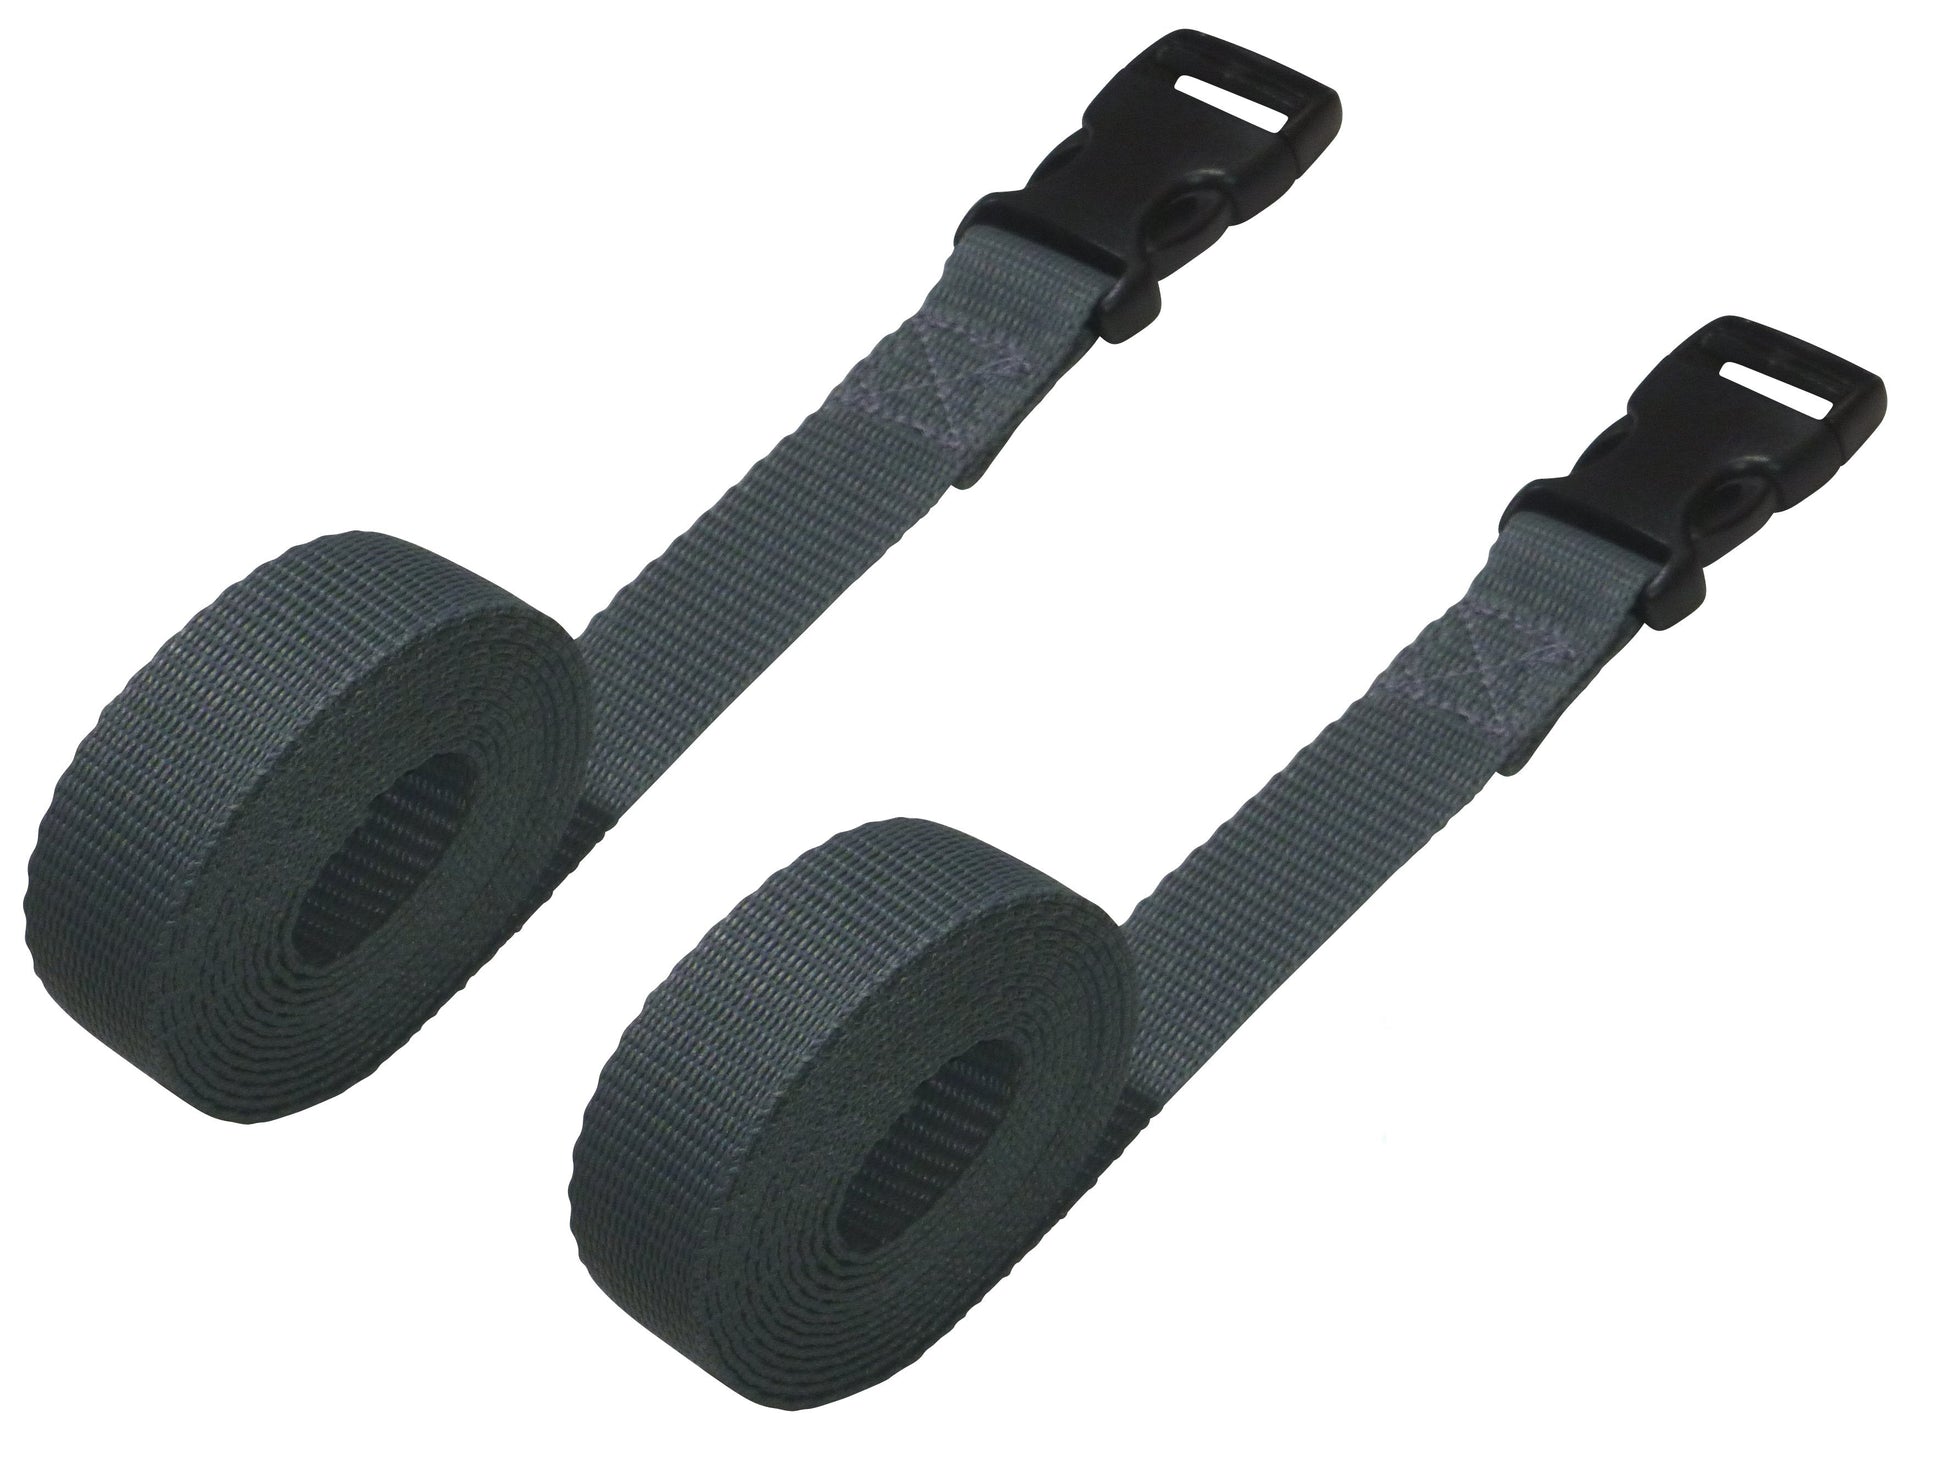 Benristraps 2 Pack Webbing Straps with Clips - Adjustable Luggage Straps in grey